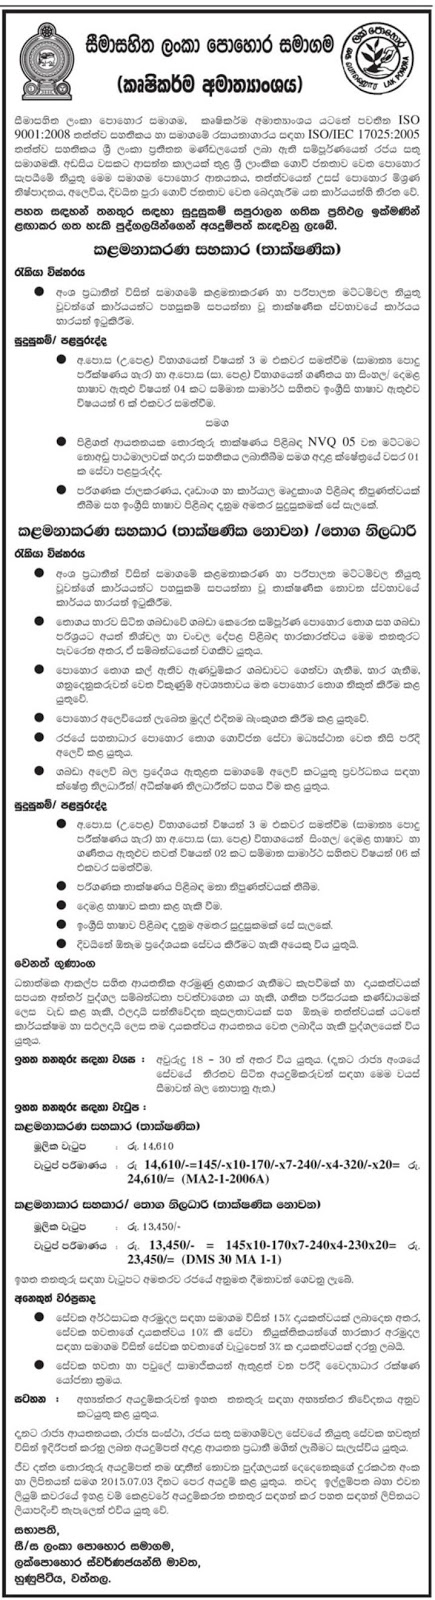 Vacancies in Ministry of Agriculture Sri Lanka